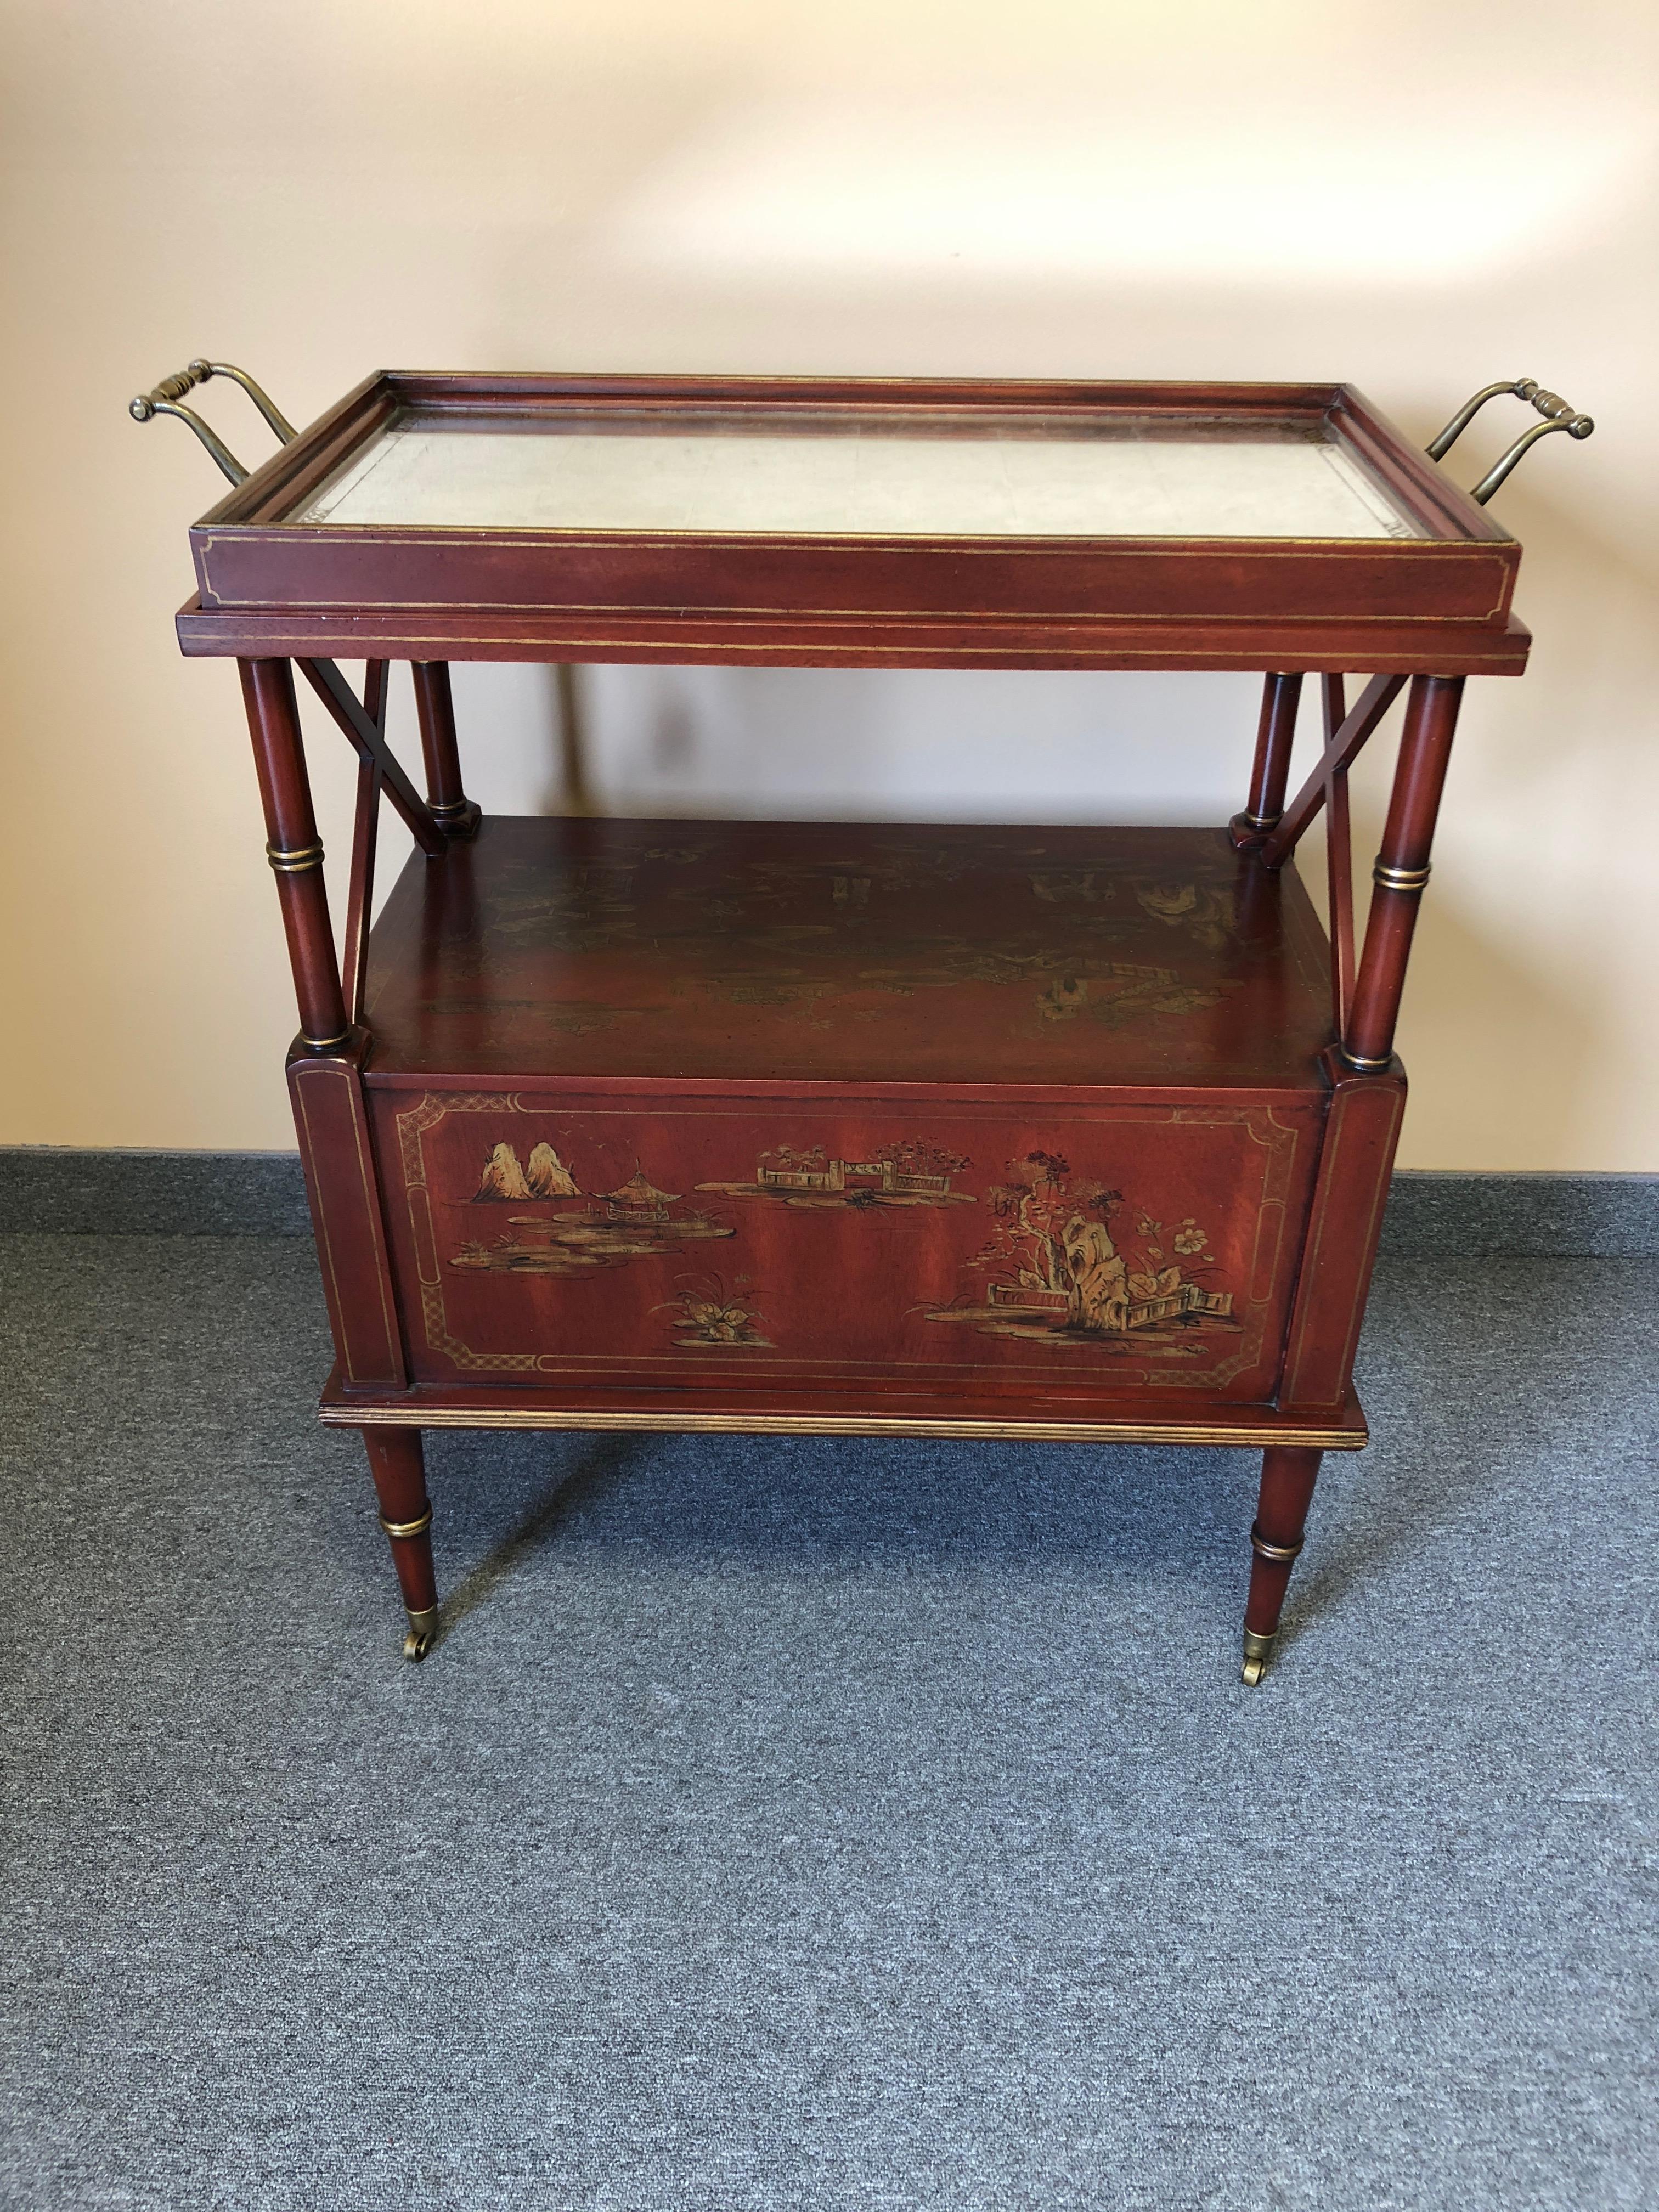 An elegant cinnabar red and gold chinoiserie decorated bar or serving cart having a removable tray that's aged mirror with black and gold painted decoration. The body of the cart has Asian landscapes, figures and animals, and is finished front, side